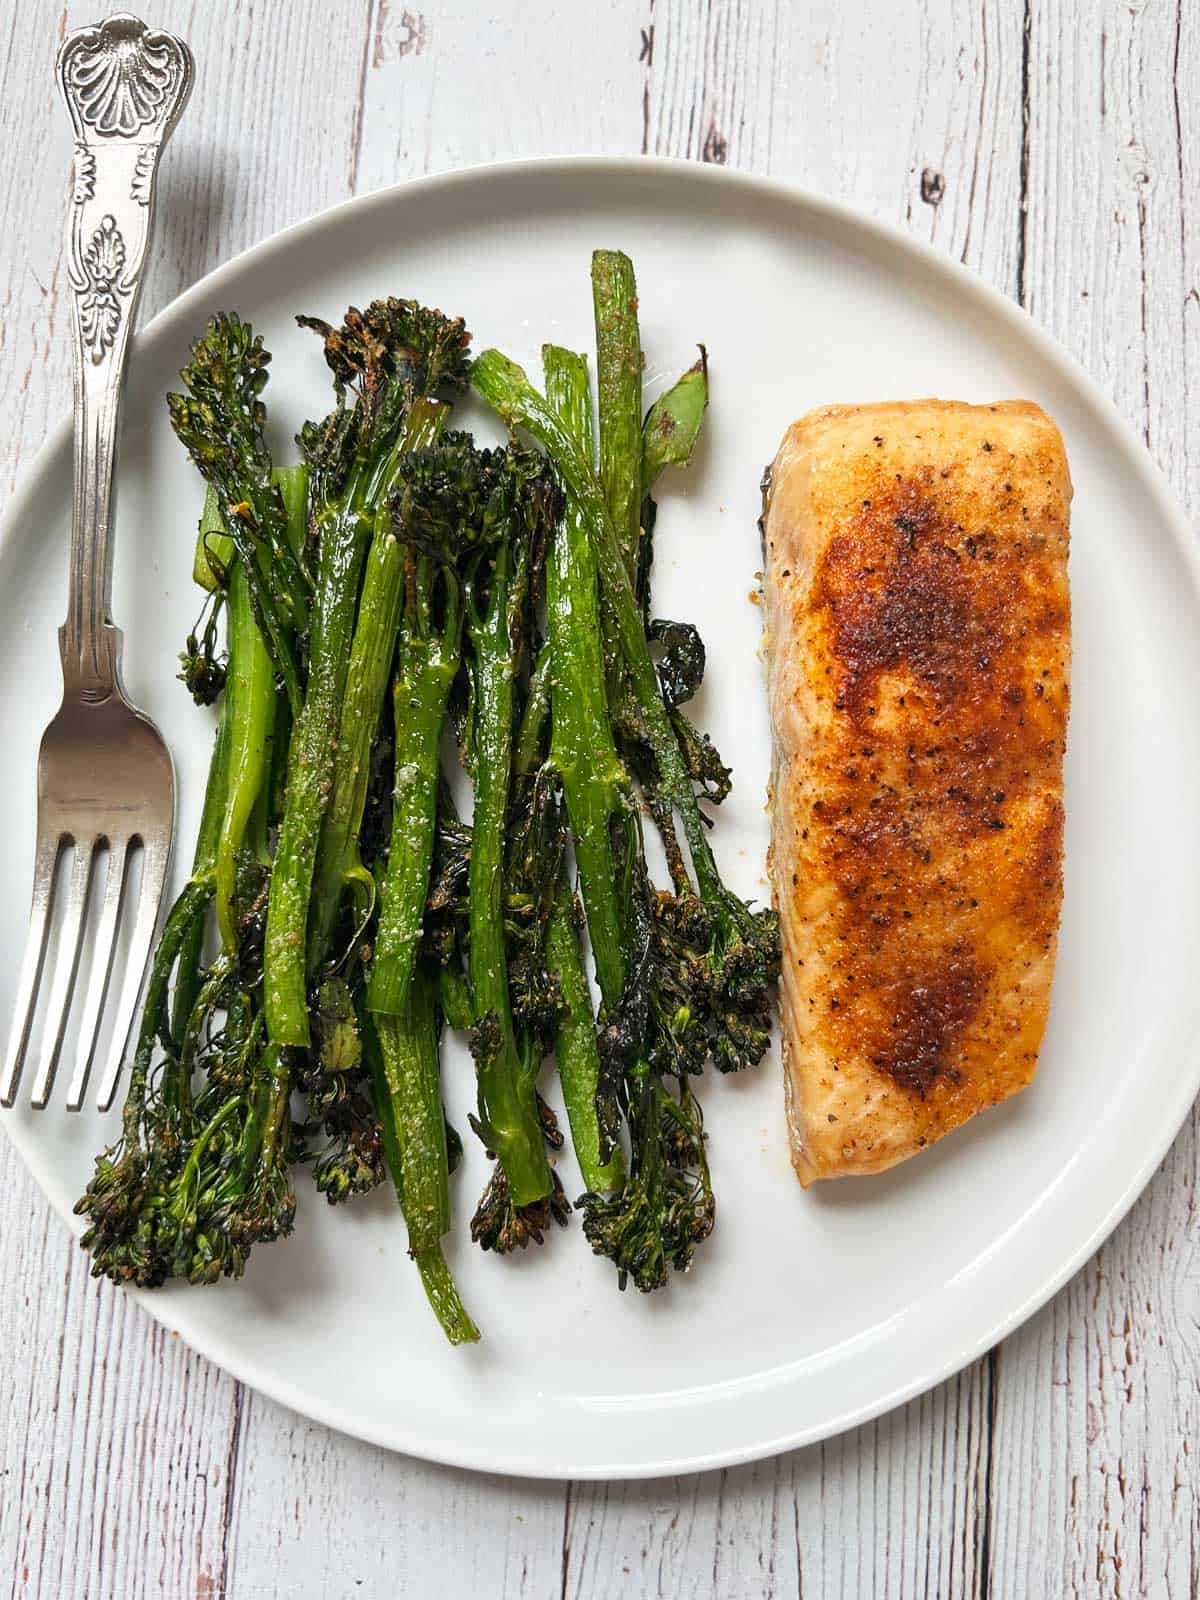 Baked salmon seasoned with chili powder is served with roasted broccolini.